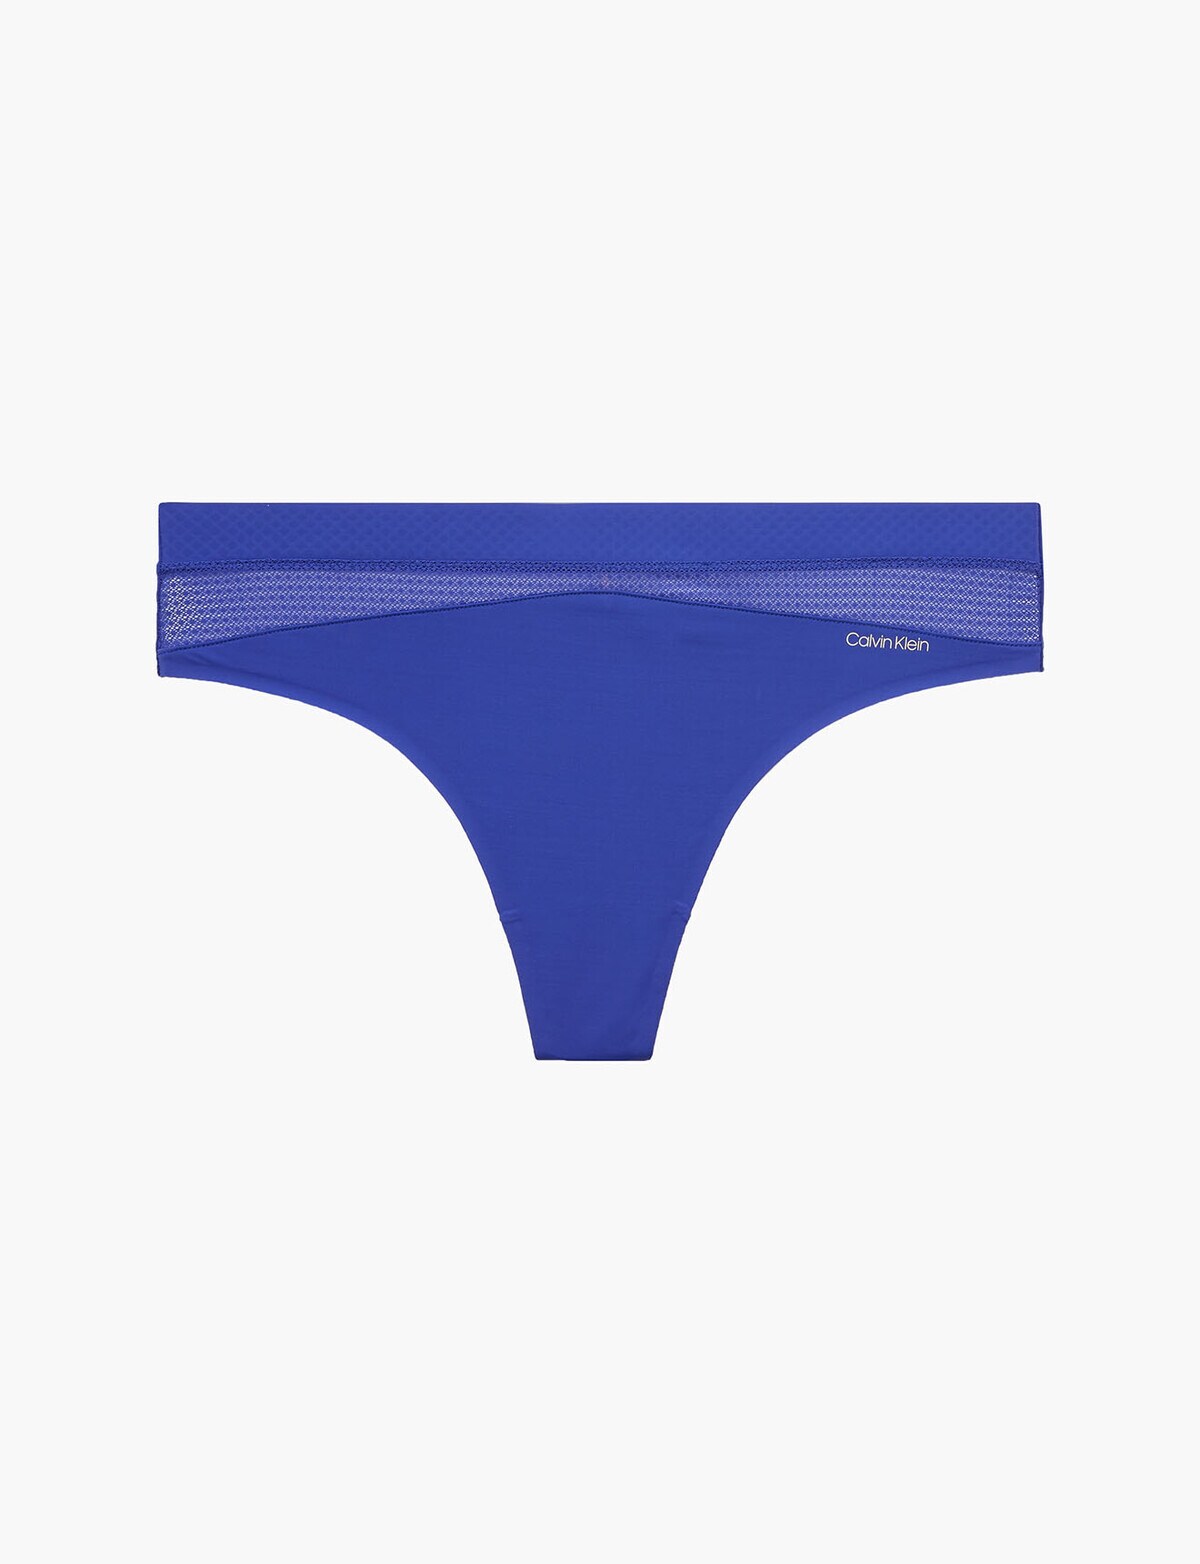 Calvin Klein Women's Invisibles Thong-Panty, Polished Blue, Small